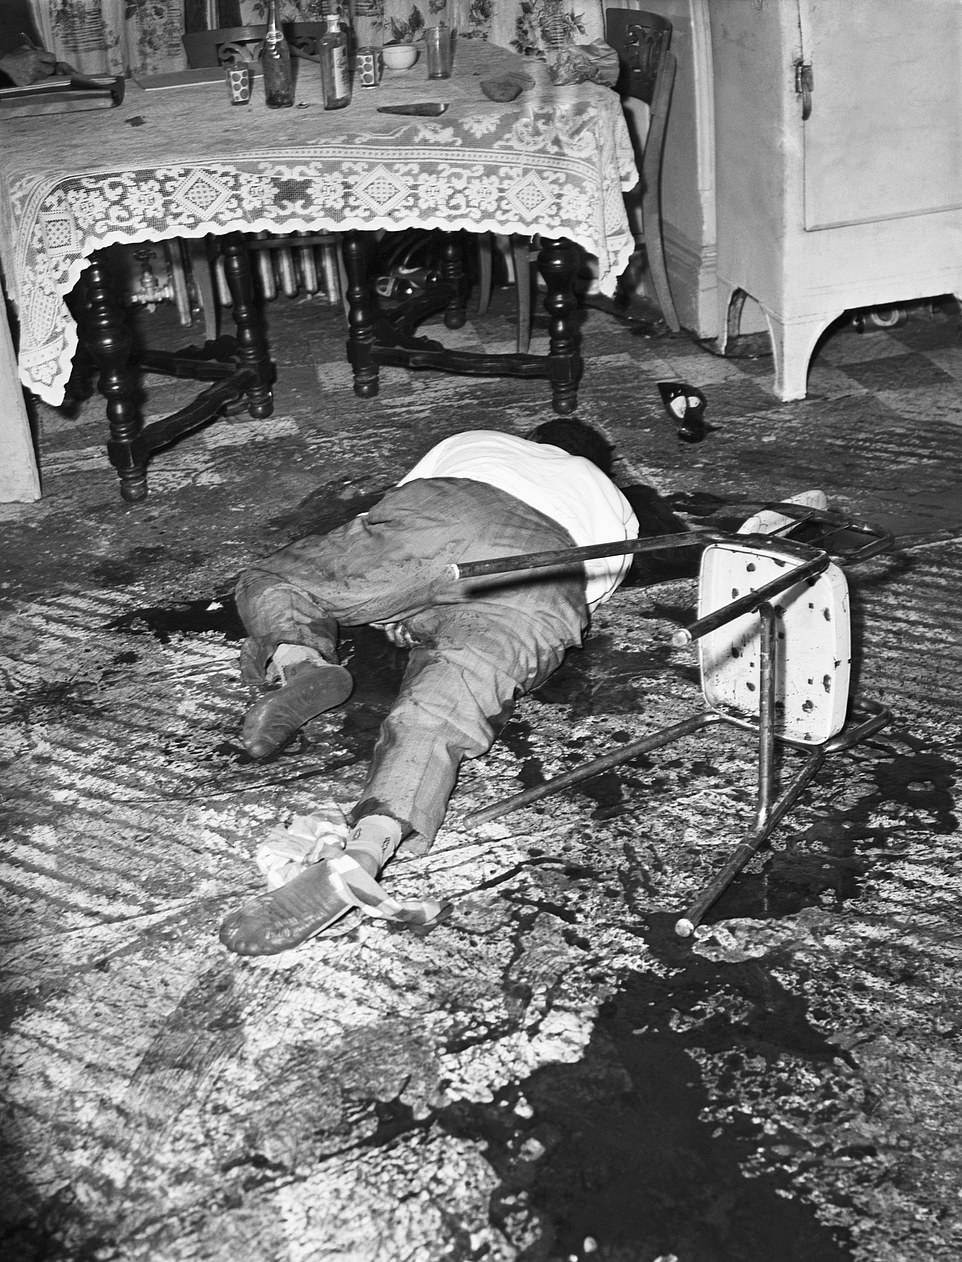 This Bronx killing took place in 1962. The shoeless victim was found covered in blood sprawled across a living room floor after being shot in his chair